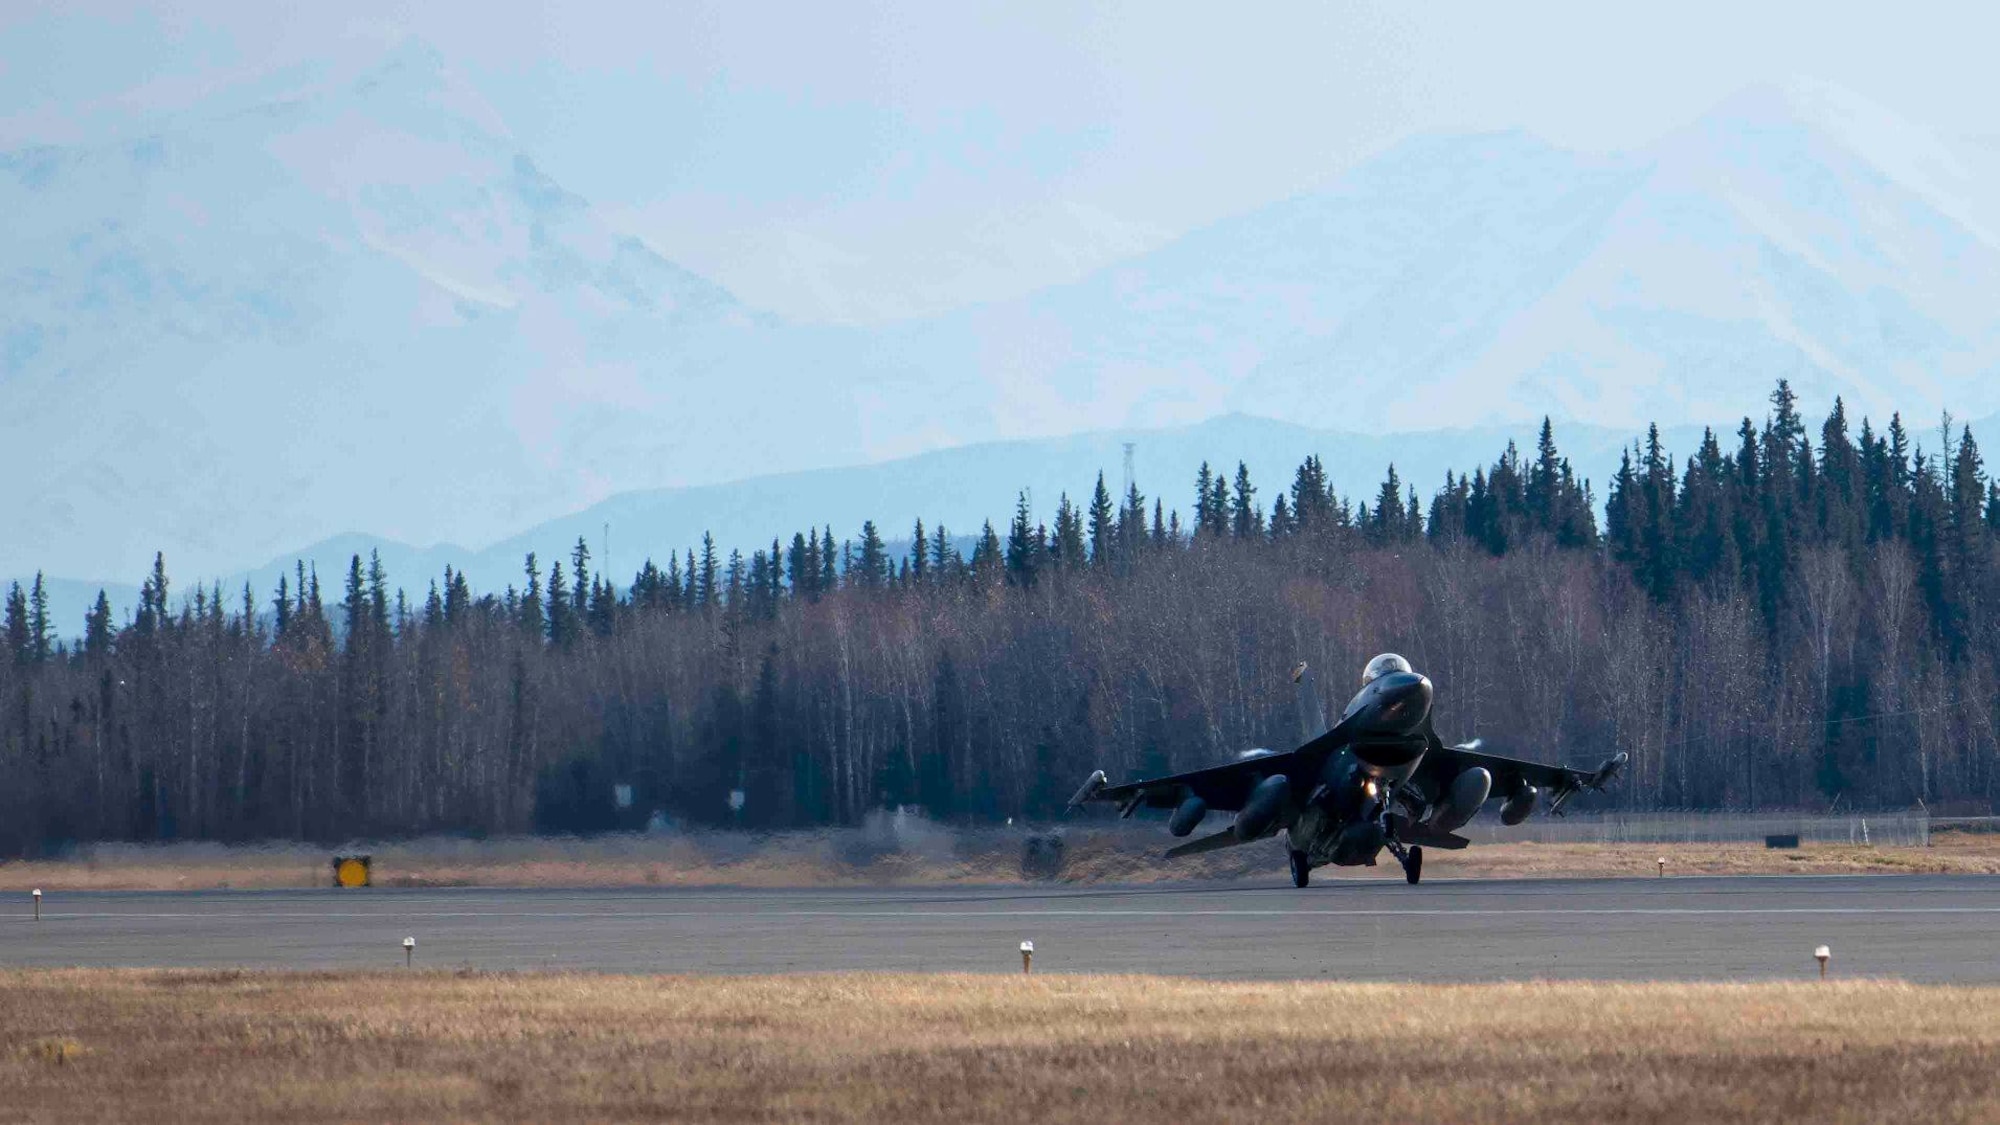 Aircraft from the 8th Fighter Wing "Wolf Pack," arrive at Eielson Air Force Base, Alaska to participate in RED FLAG-Alaska 19-1, Oct. 13, 2018. The Indo-Pacific is a top priority for the United States, and the DoD; and exercises like RF-A ensure that U.S. forces are as capable and ready as possible to face the evolving challenges in the region. The 80 FS traveled more than 3,000 miles from the Korean Peninsula to participate in RF-A. (U.S. Air Force photo by Staff Sgt. Levi Rowse)